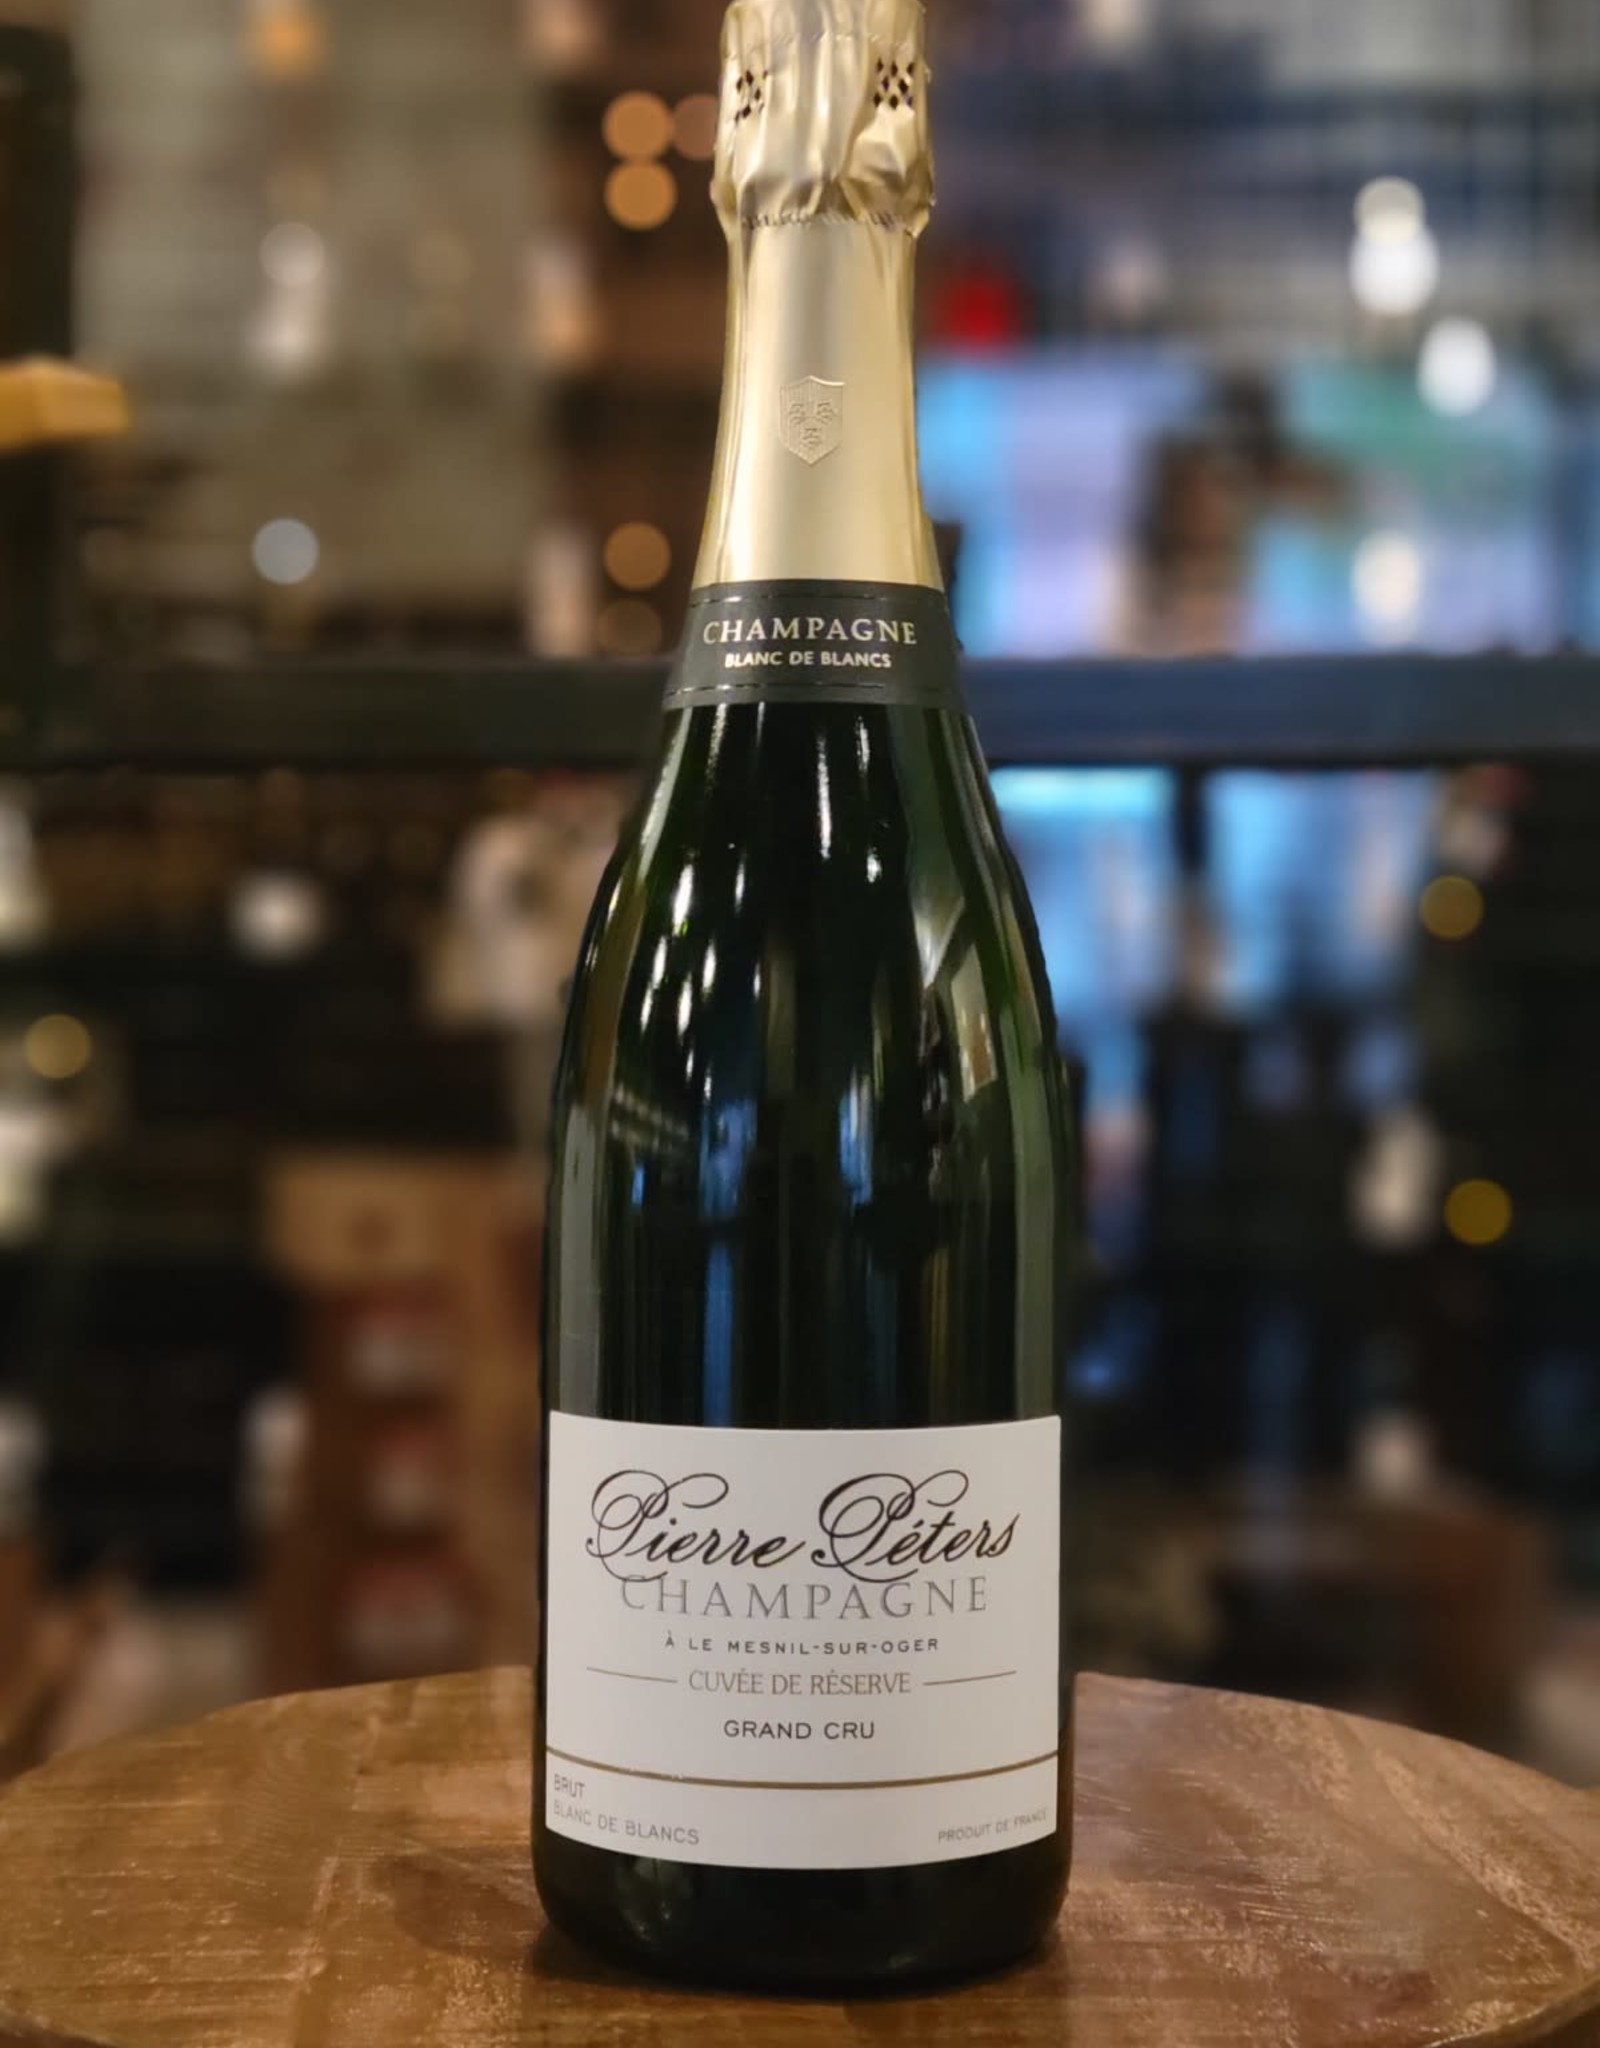 Pierre Peters, Cuvee Reserve Champagne